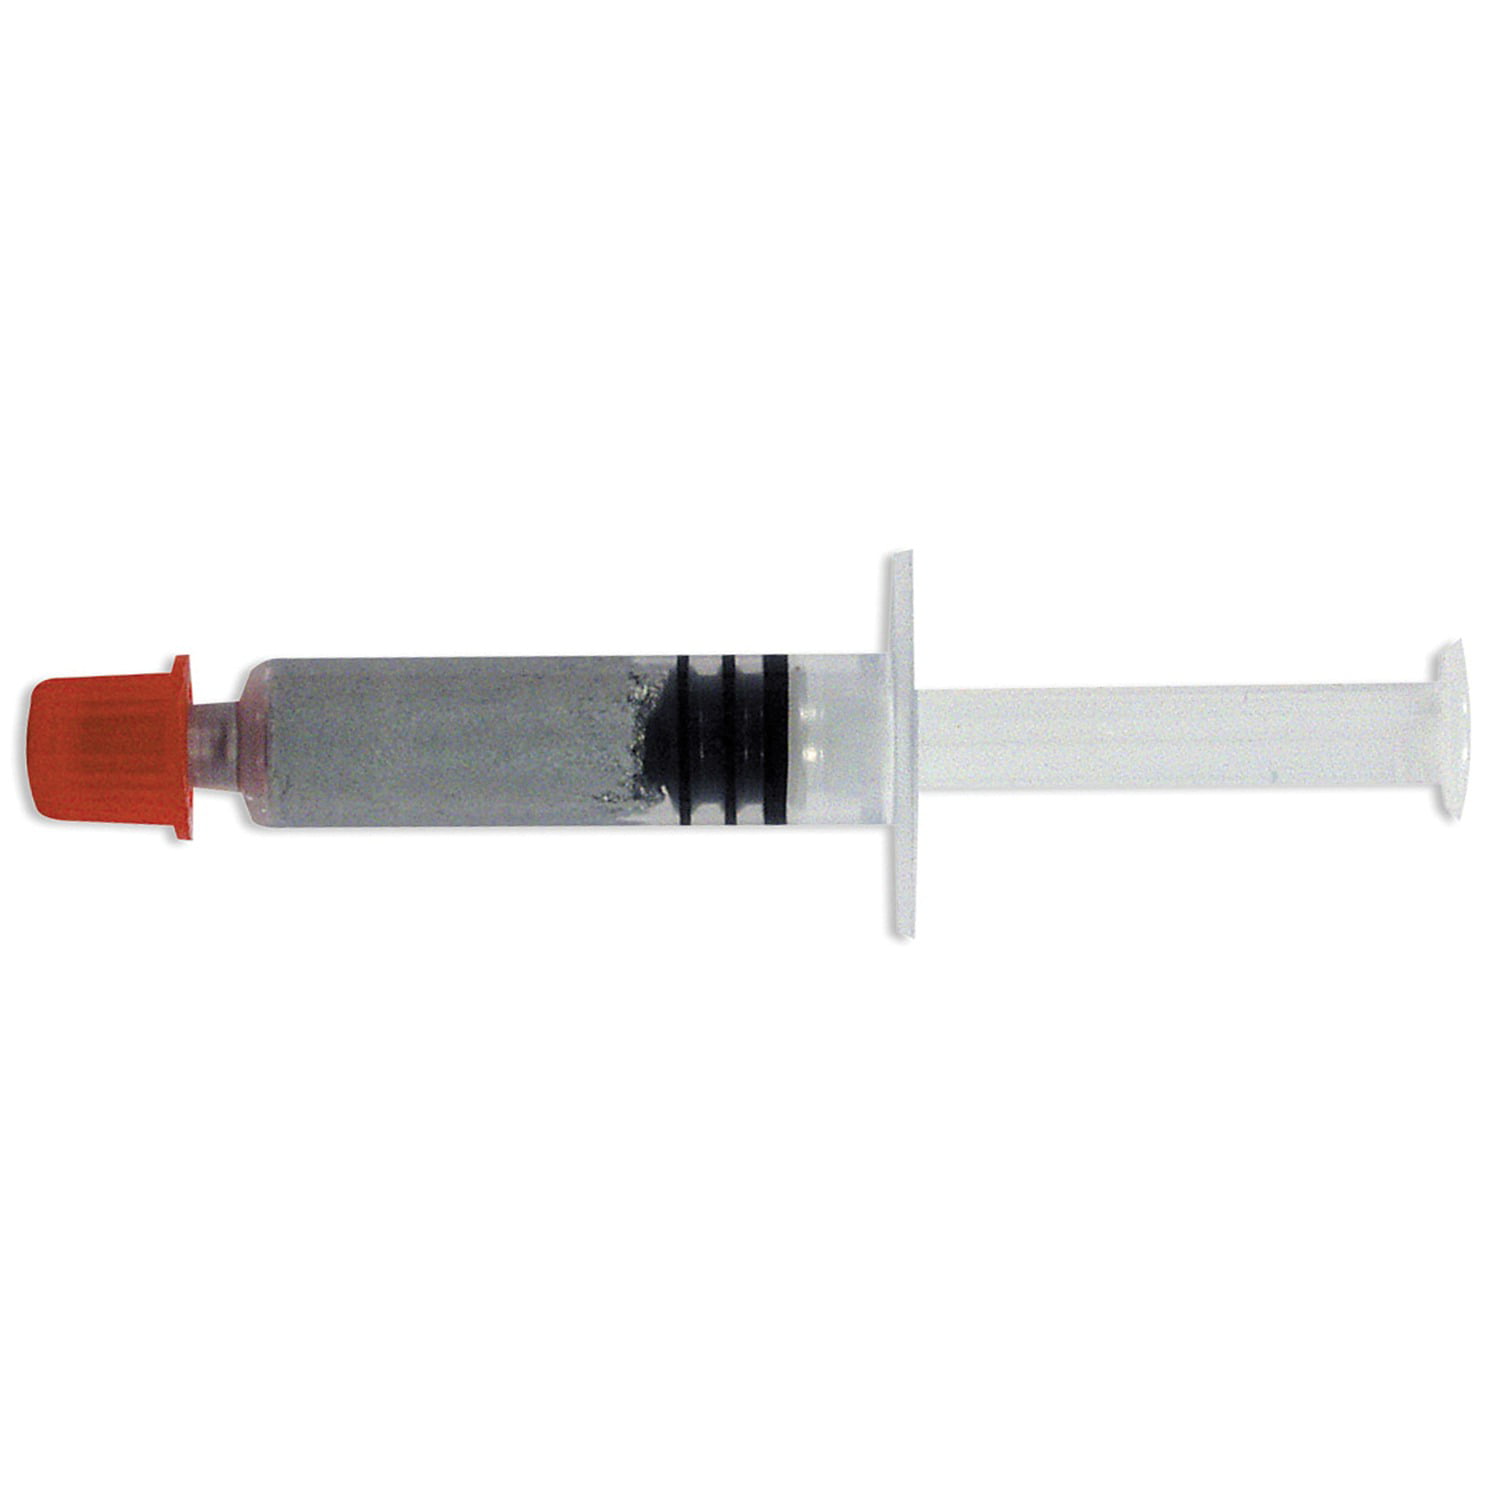 Thermal Paste, Pack of 5 Re-sealable Syringes (1.5g / each), Metal Oxide  Compound, CPU Heat Sink Thermal Grease Paste